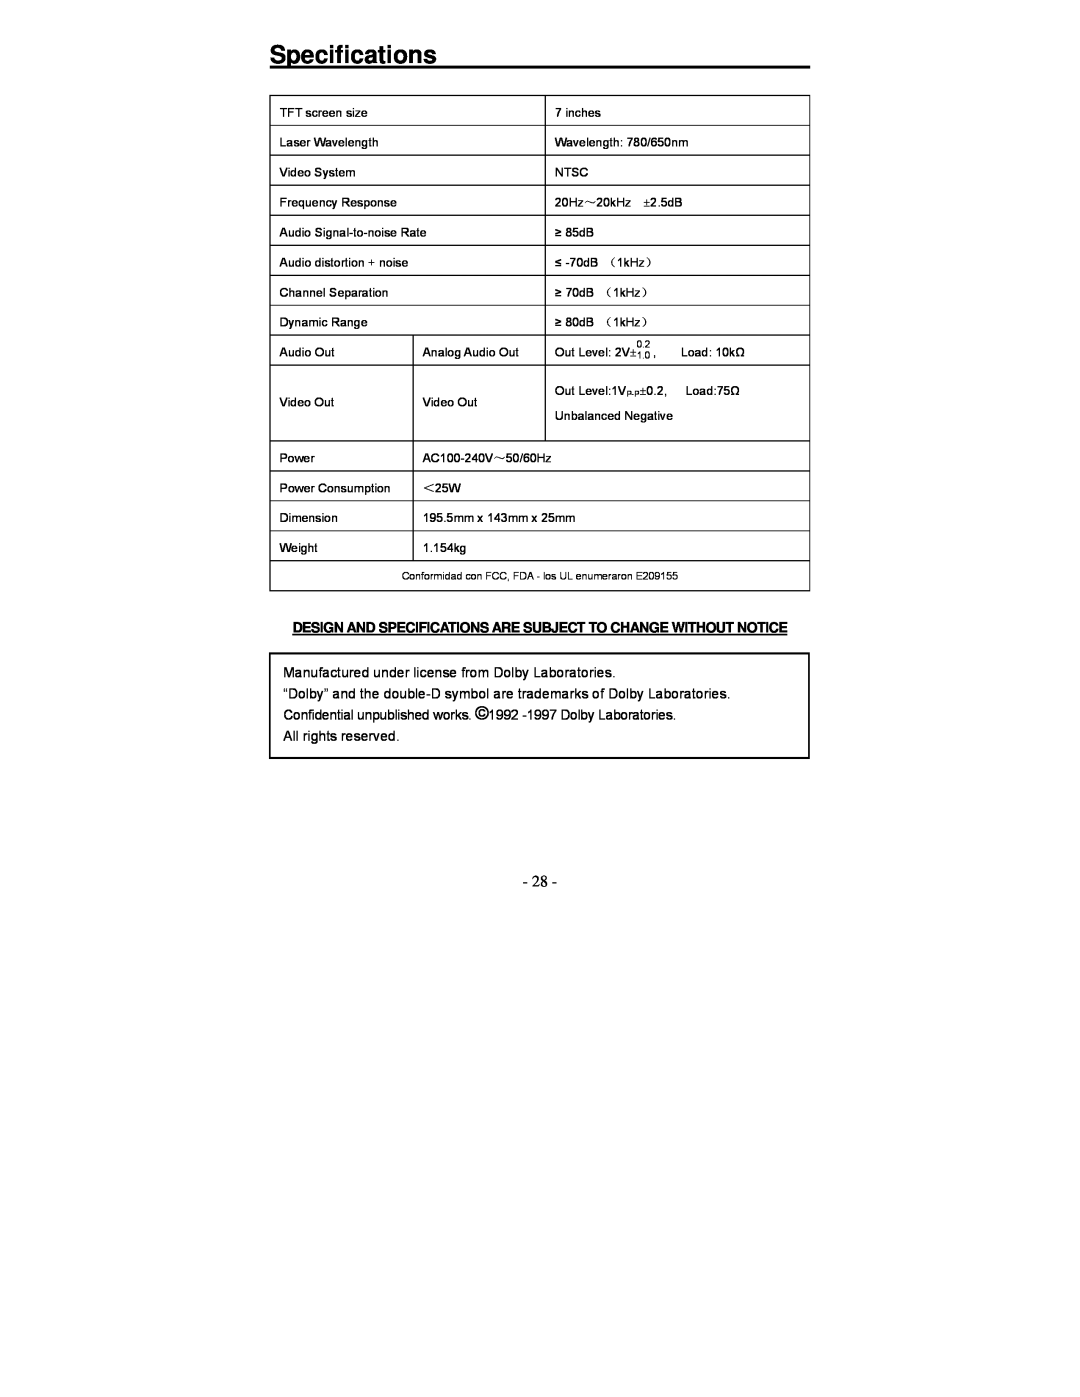 Polaroid PDV-0713A operation manual Design And Specifications Are Subject To Change Without Notice 